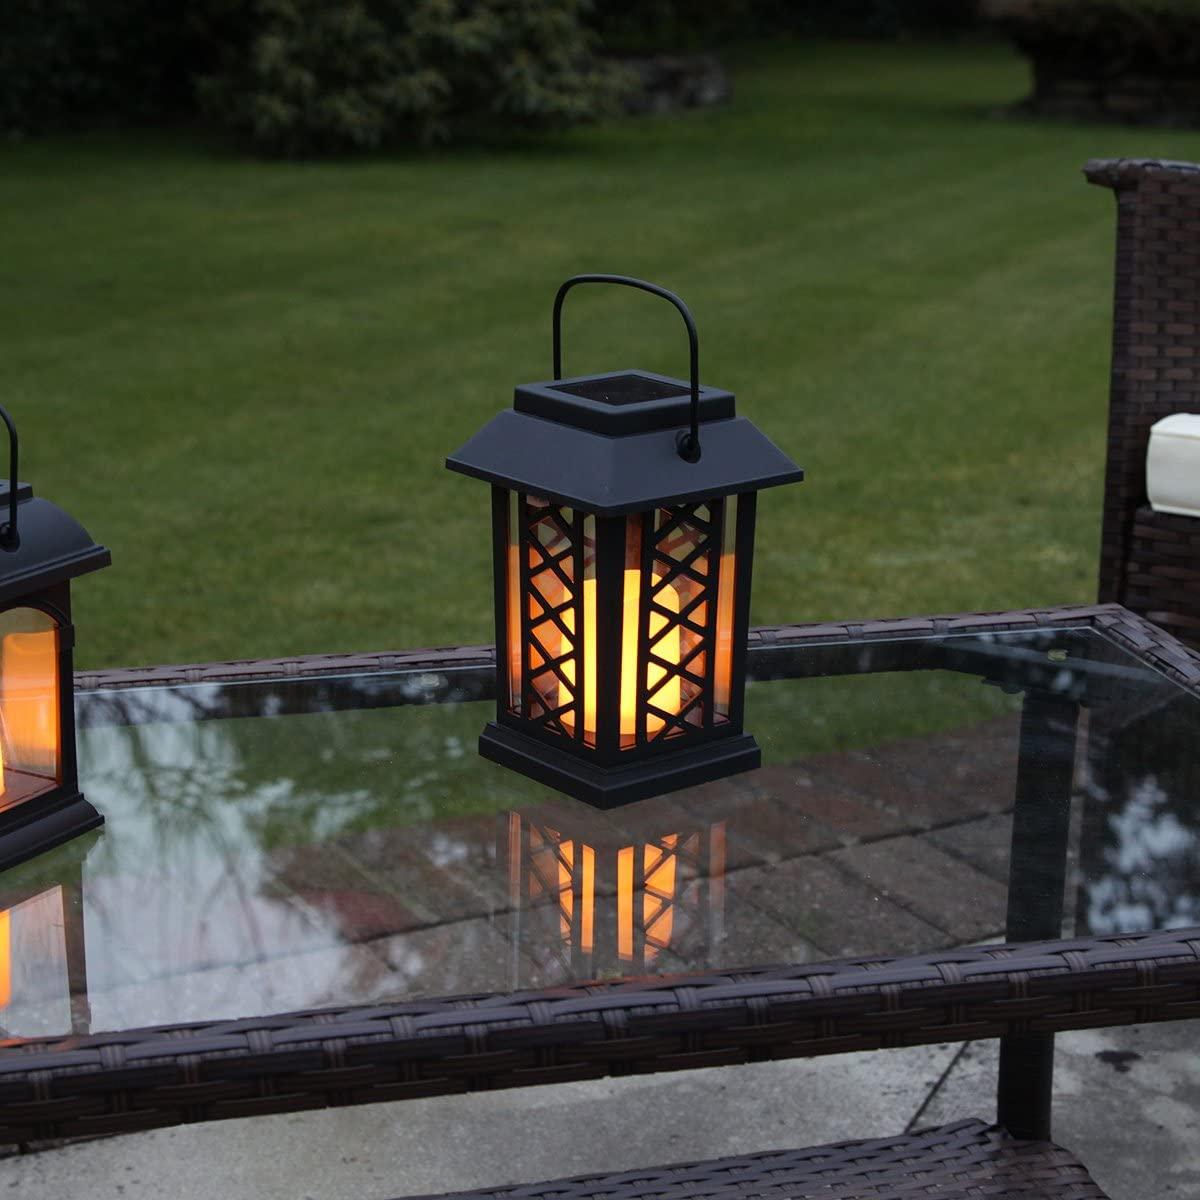 Solar Powered Flickering LED Candle Trellis Garden Lantern, 17.5cm - Home Inspired Gifts